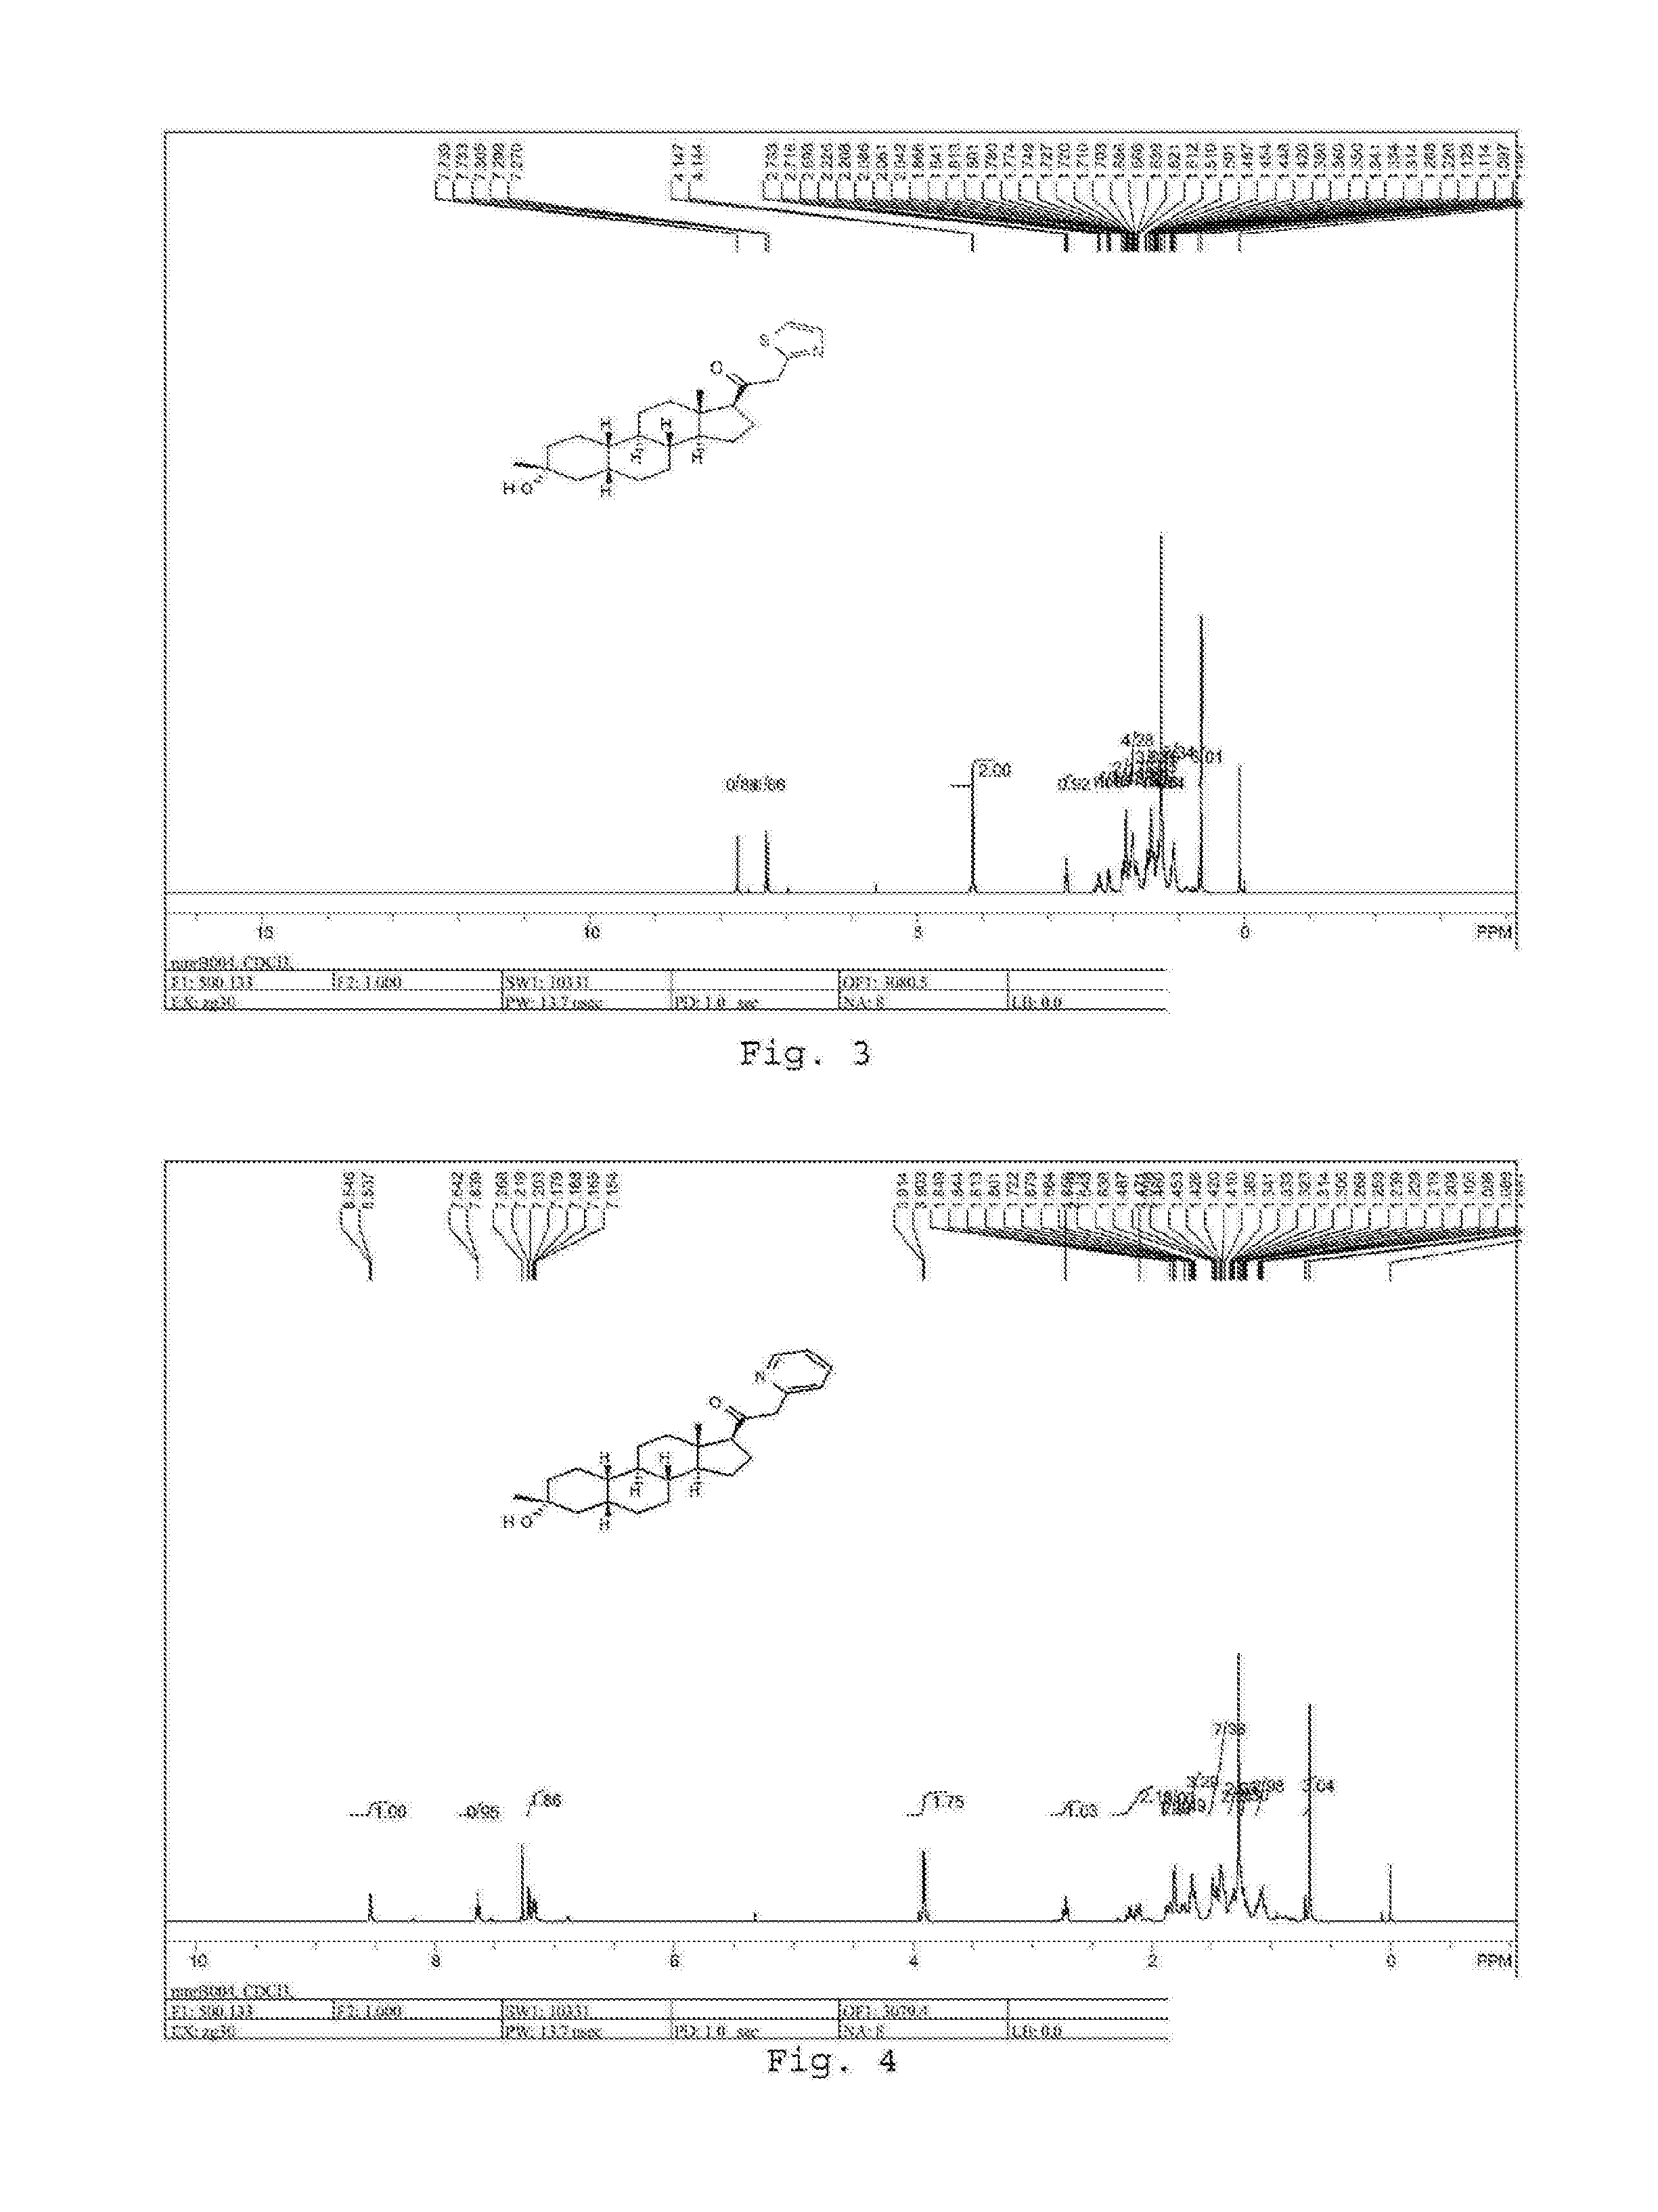 19-nor c3, 3-disubstituted c21-c-bound heteroaryl steroids and methods of use thereof